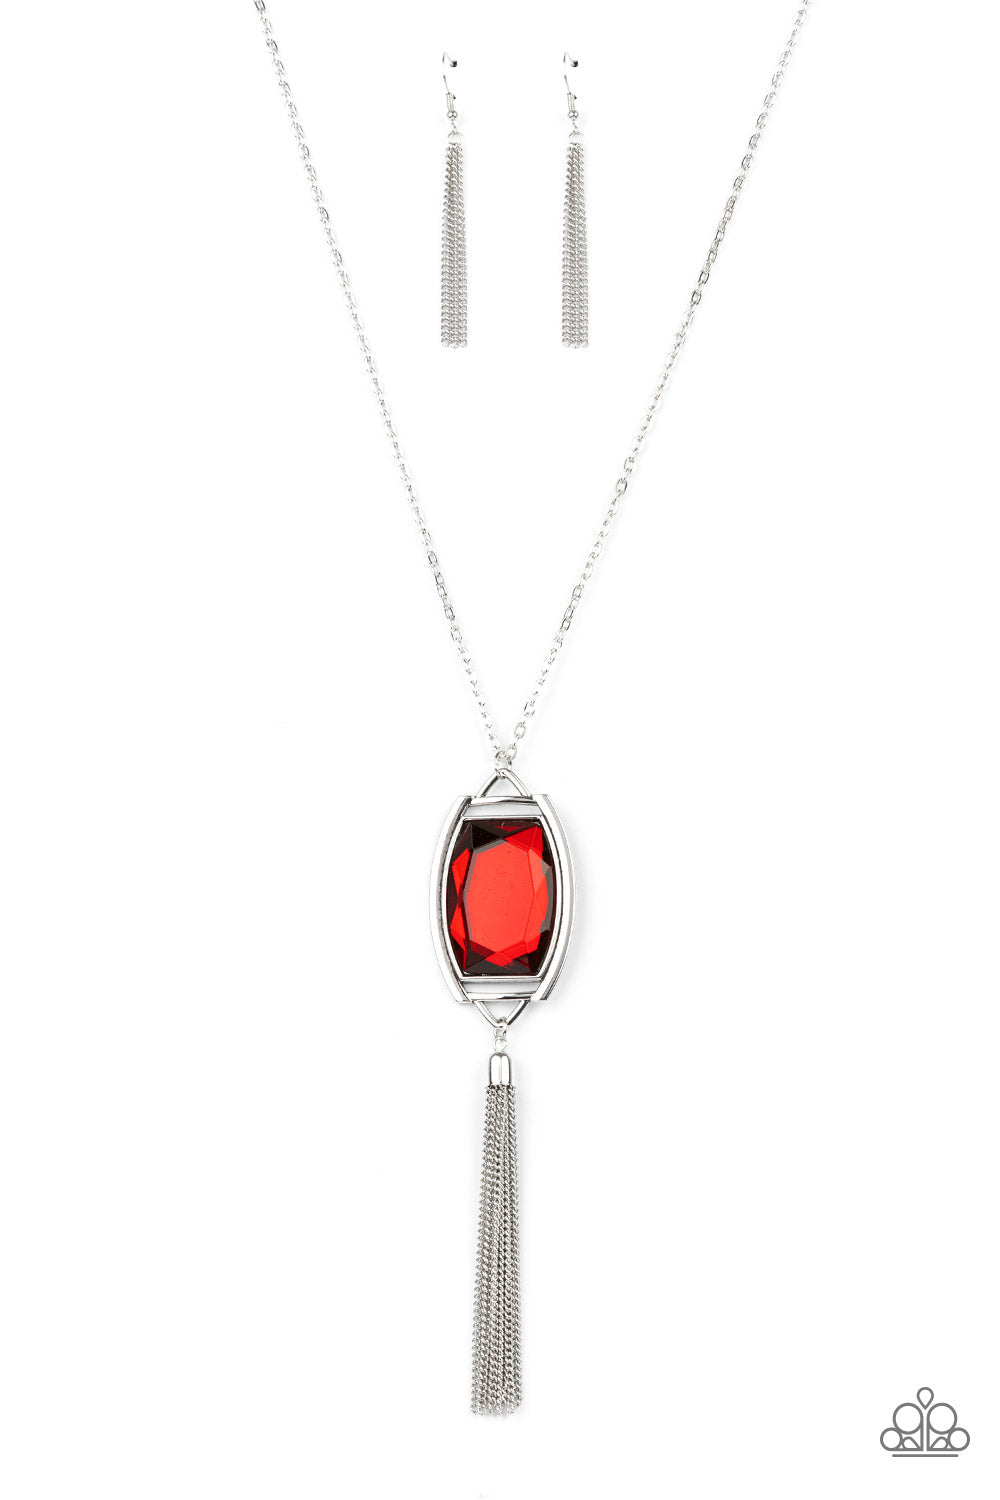 Timeless Talisman - Red Gem - Silver Fashion Necklace - Paparazzi Accessories - Encased in an antiqued silver frame, an oversized red gem swings from the bottom of an ornate silver chain. A shimmery silver chain tassel swings from the bottom of the sparkly pendant, creating a regal talisman. Features an adjustable clasp closure. Bejeweled Accessories By Kristie - Trendy fashion jewelry for everyone -